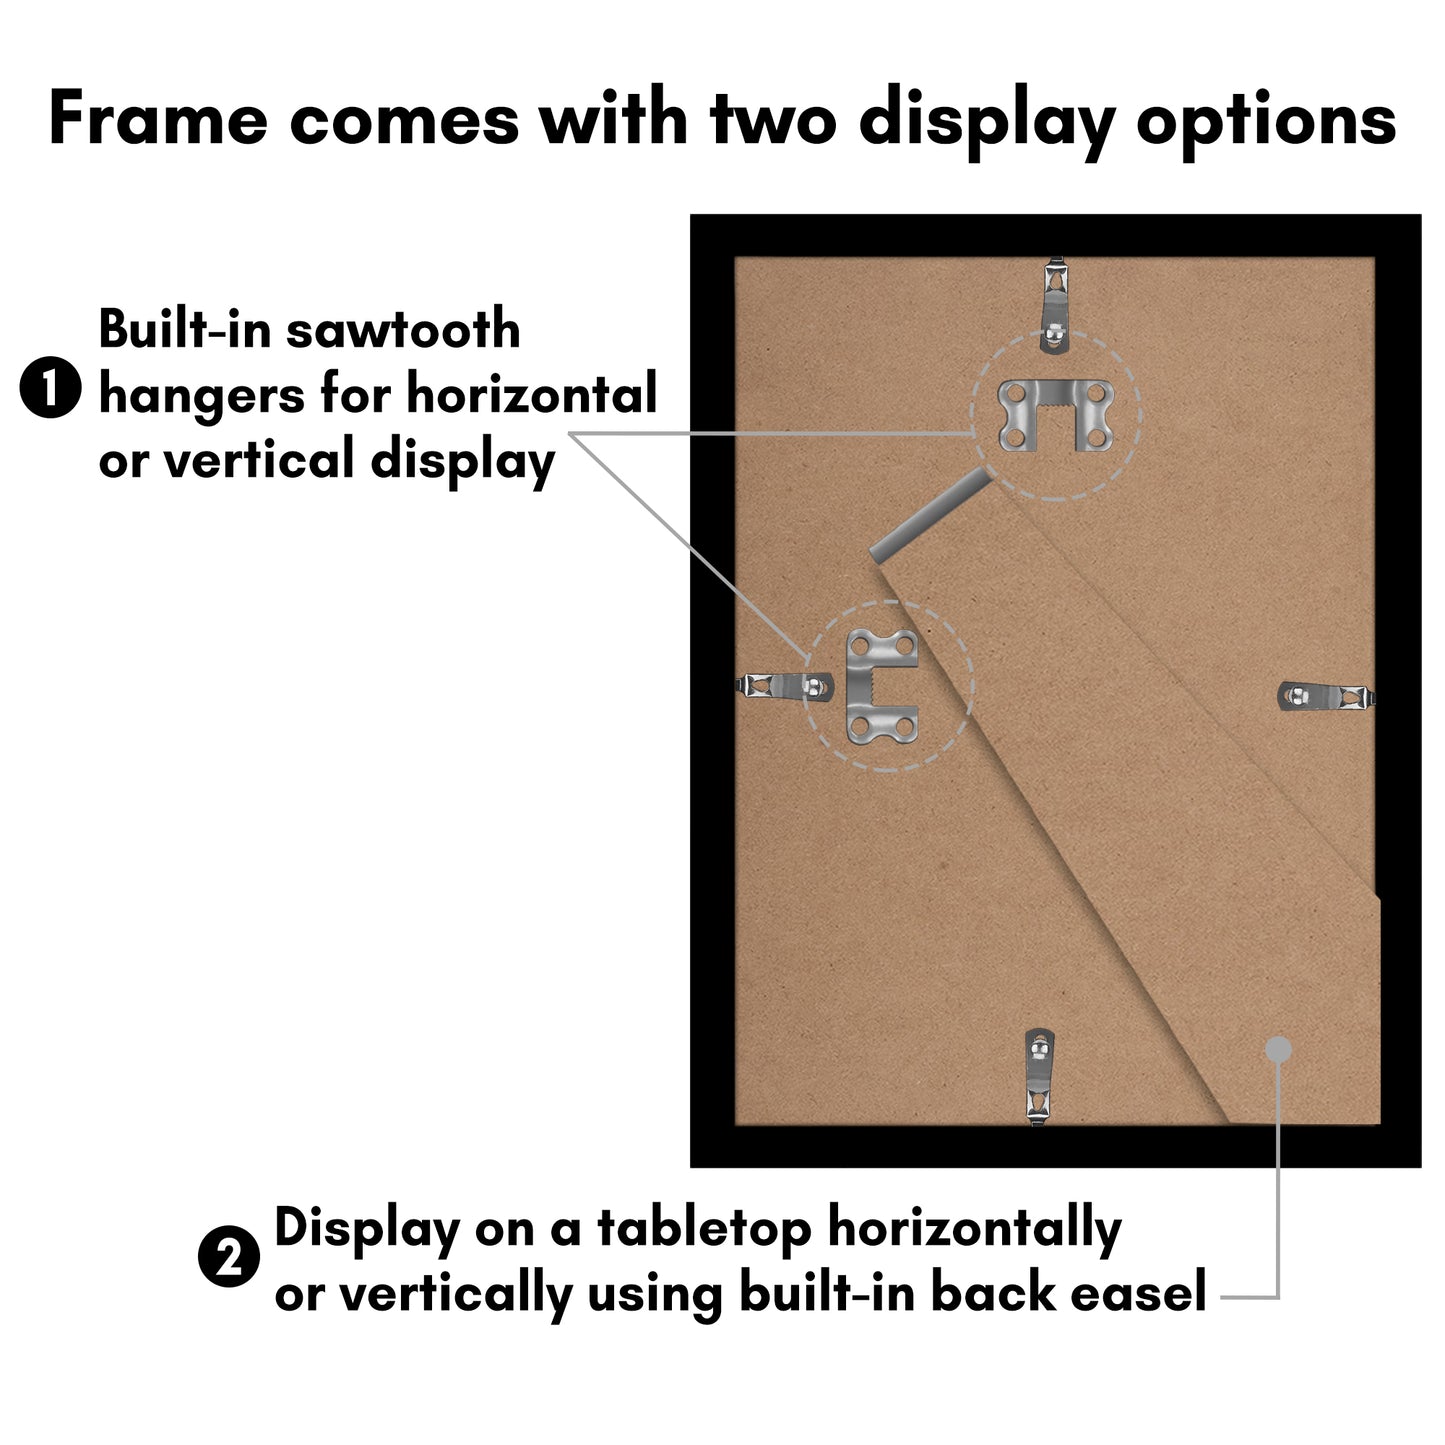 Picture Frame Set of 5 - Gallery Wall Frame Set with Included Hanging Hardware - Horizontal or Vertical Display